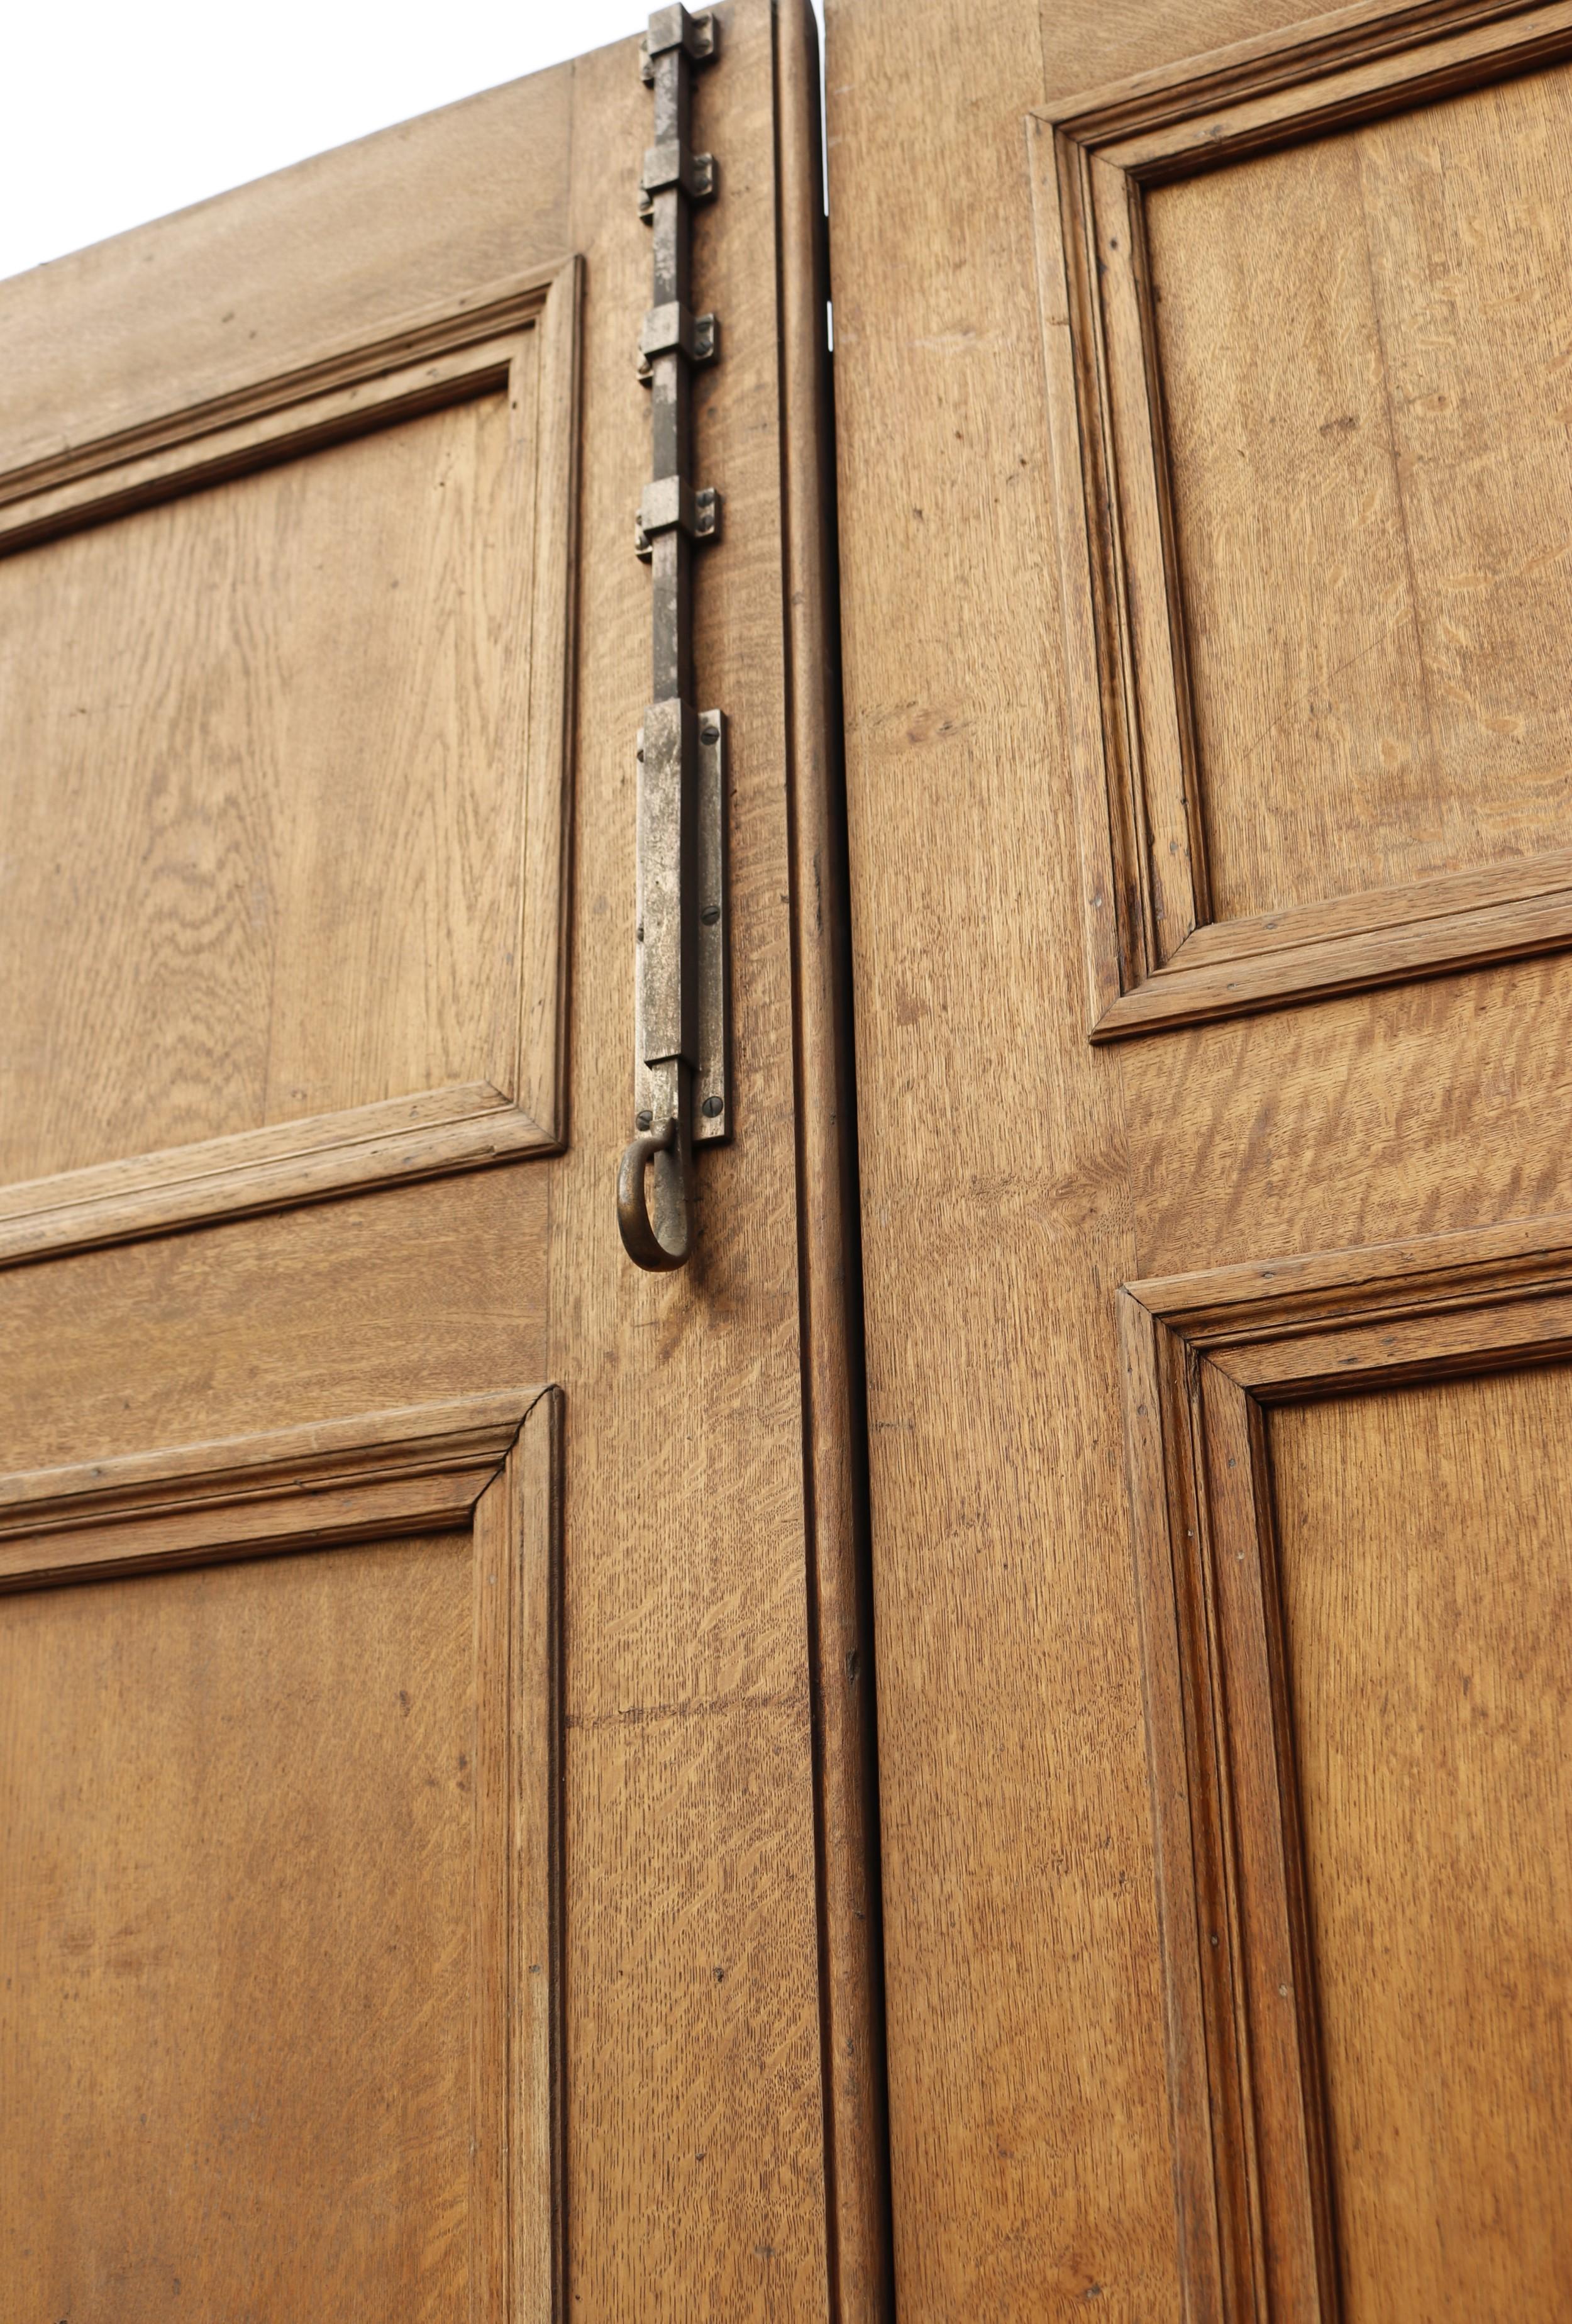 A set of strong solid oak exterior doors together with their original chunky oak frame. These door were salvaged from a country house in North Yorkshire.
 
Additional Dimensions:
 
Doors
Height 255 cm
Width 70 and 72.5 cm (overall